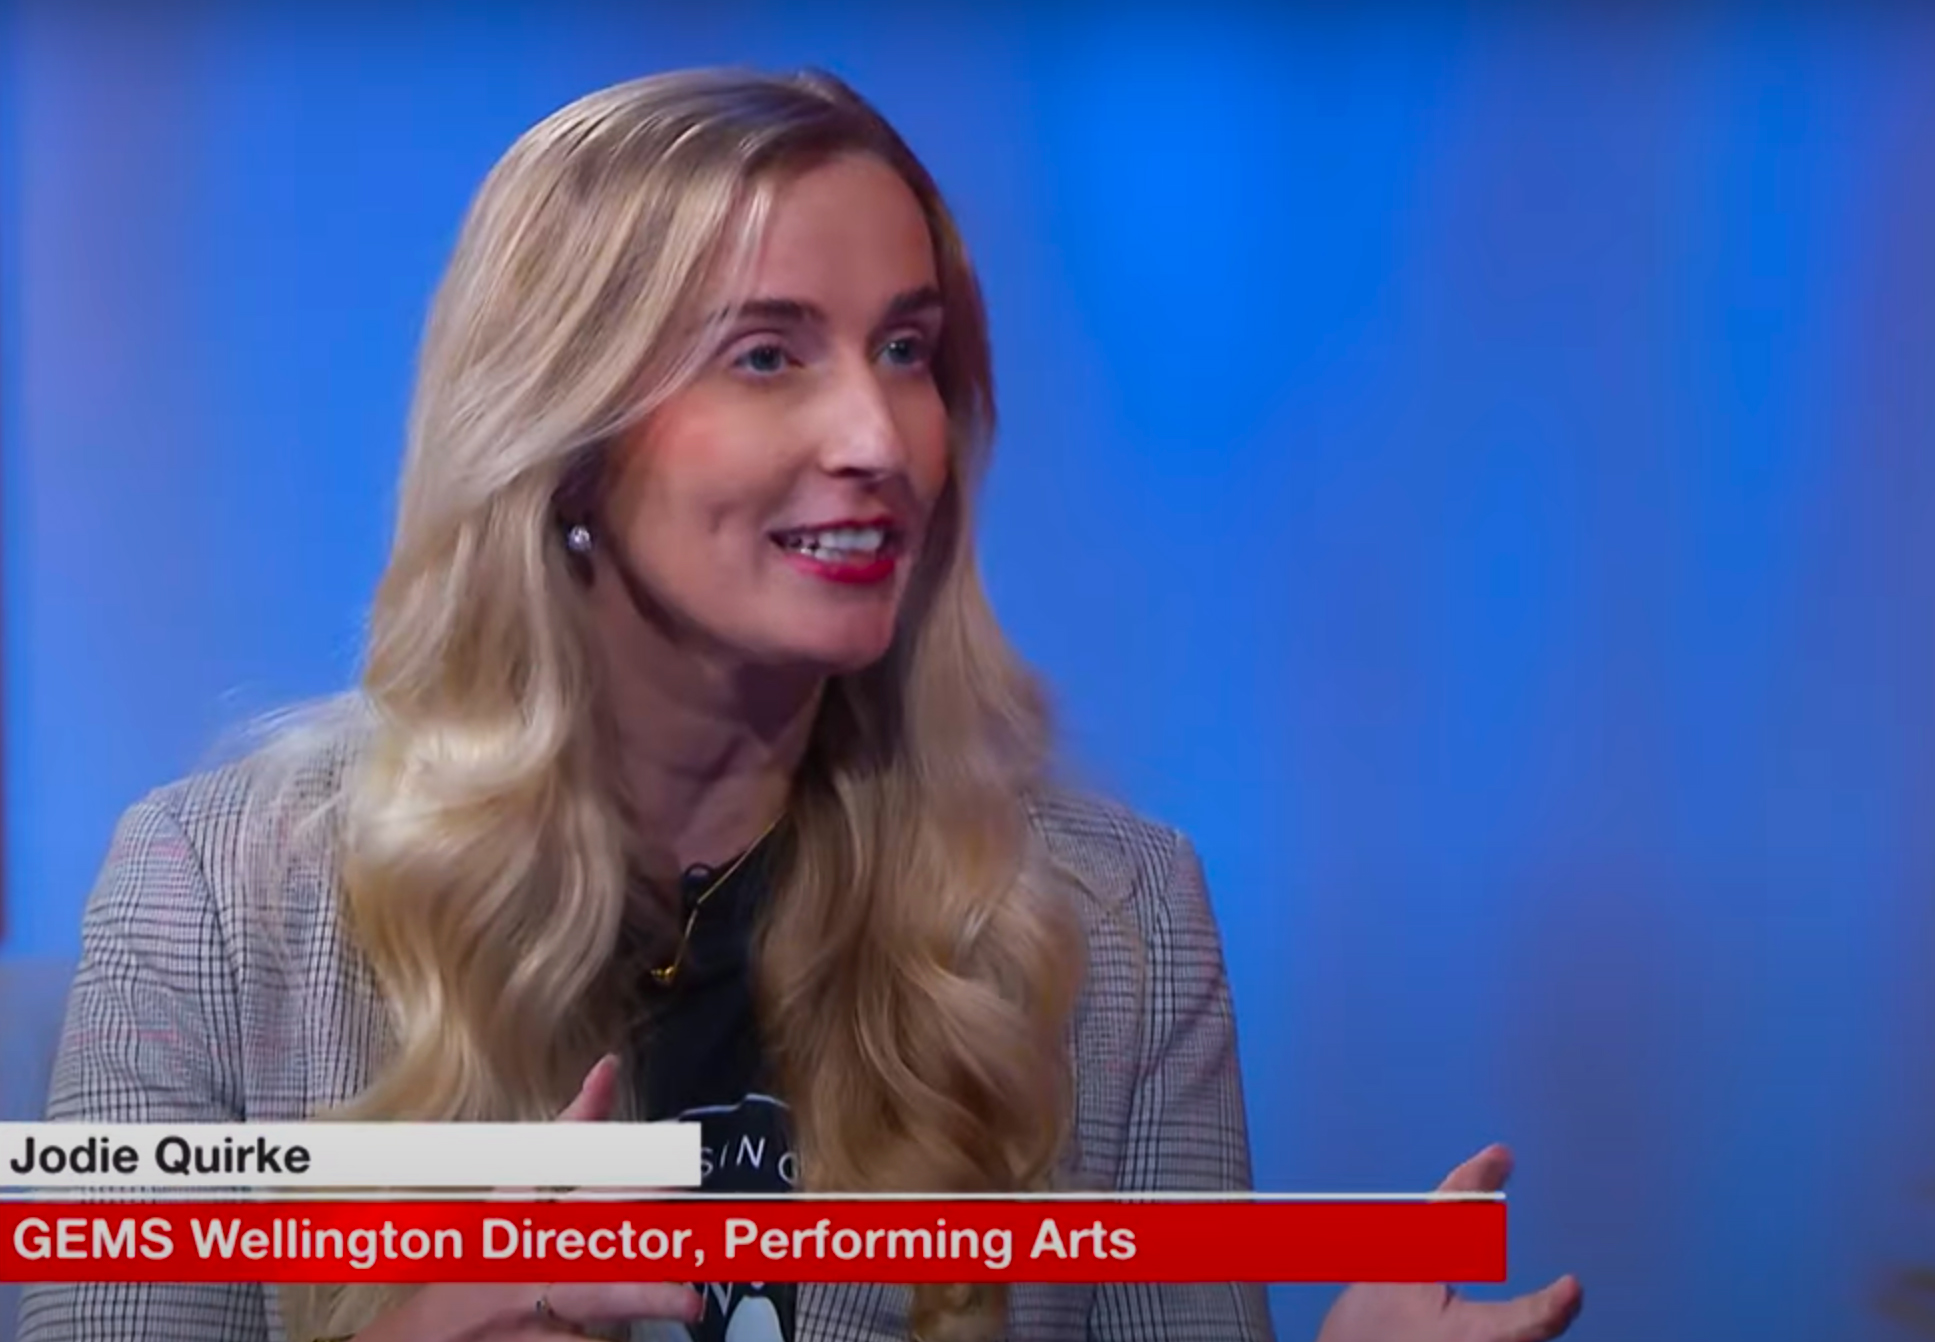 Jodie Quirke, Director of The Performing Arts at GEMS Wellington Schools 